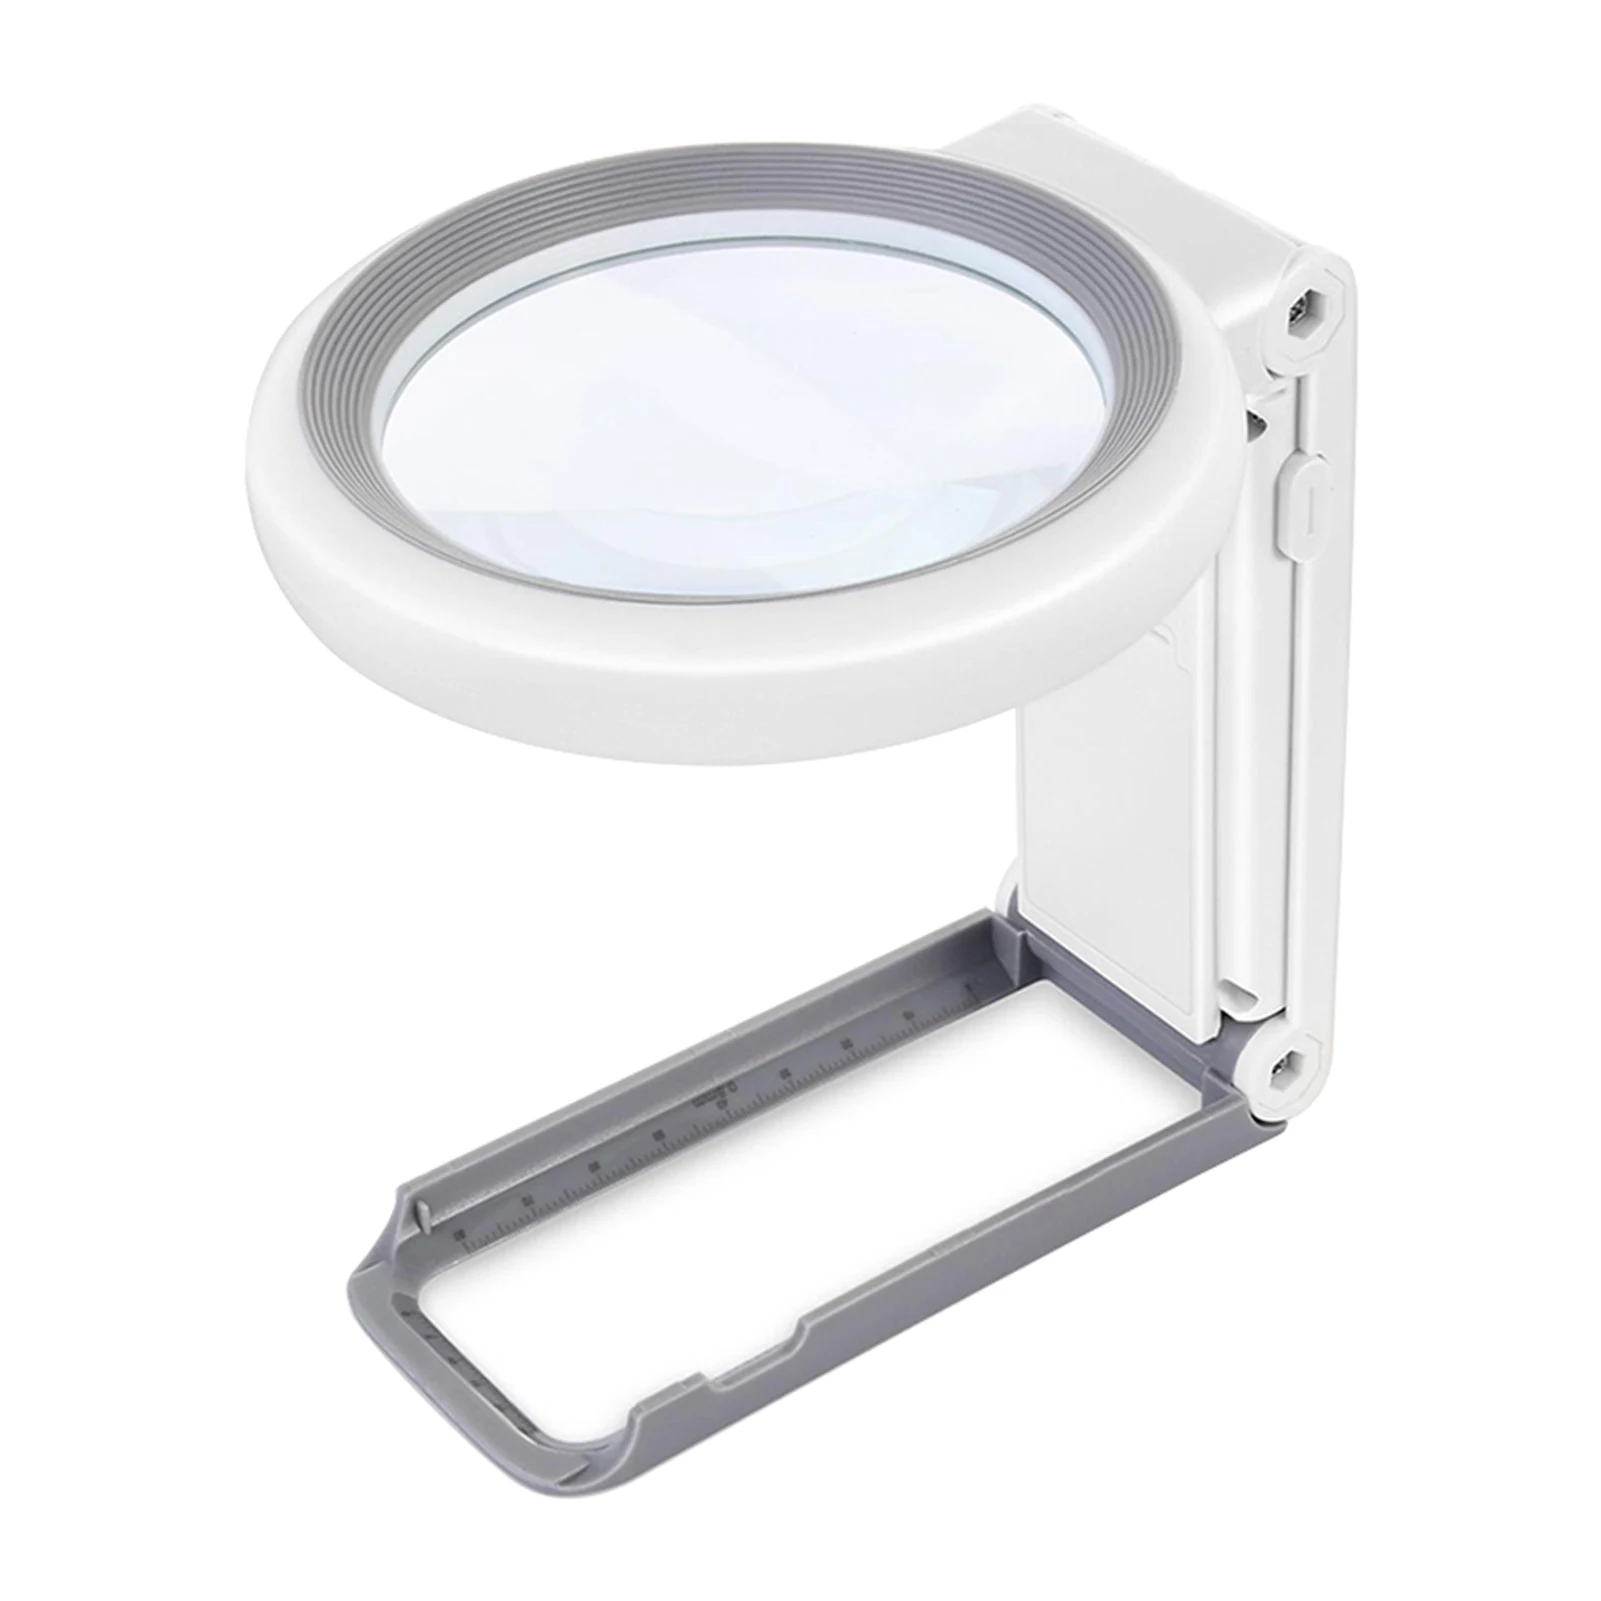 

30X 10X Macular Degeneration Folding Handheld Lighted Magnifier For Jewelry Battery Powered LED Magnifying Glass Gift With Stand